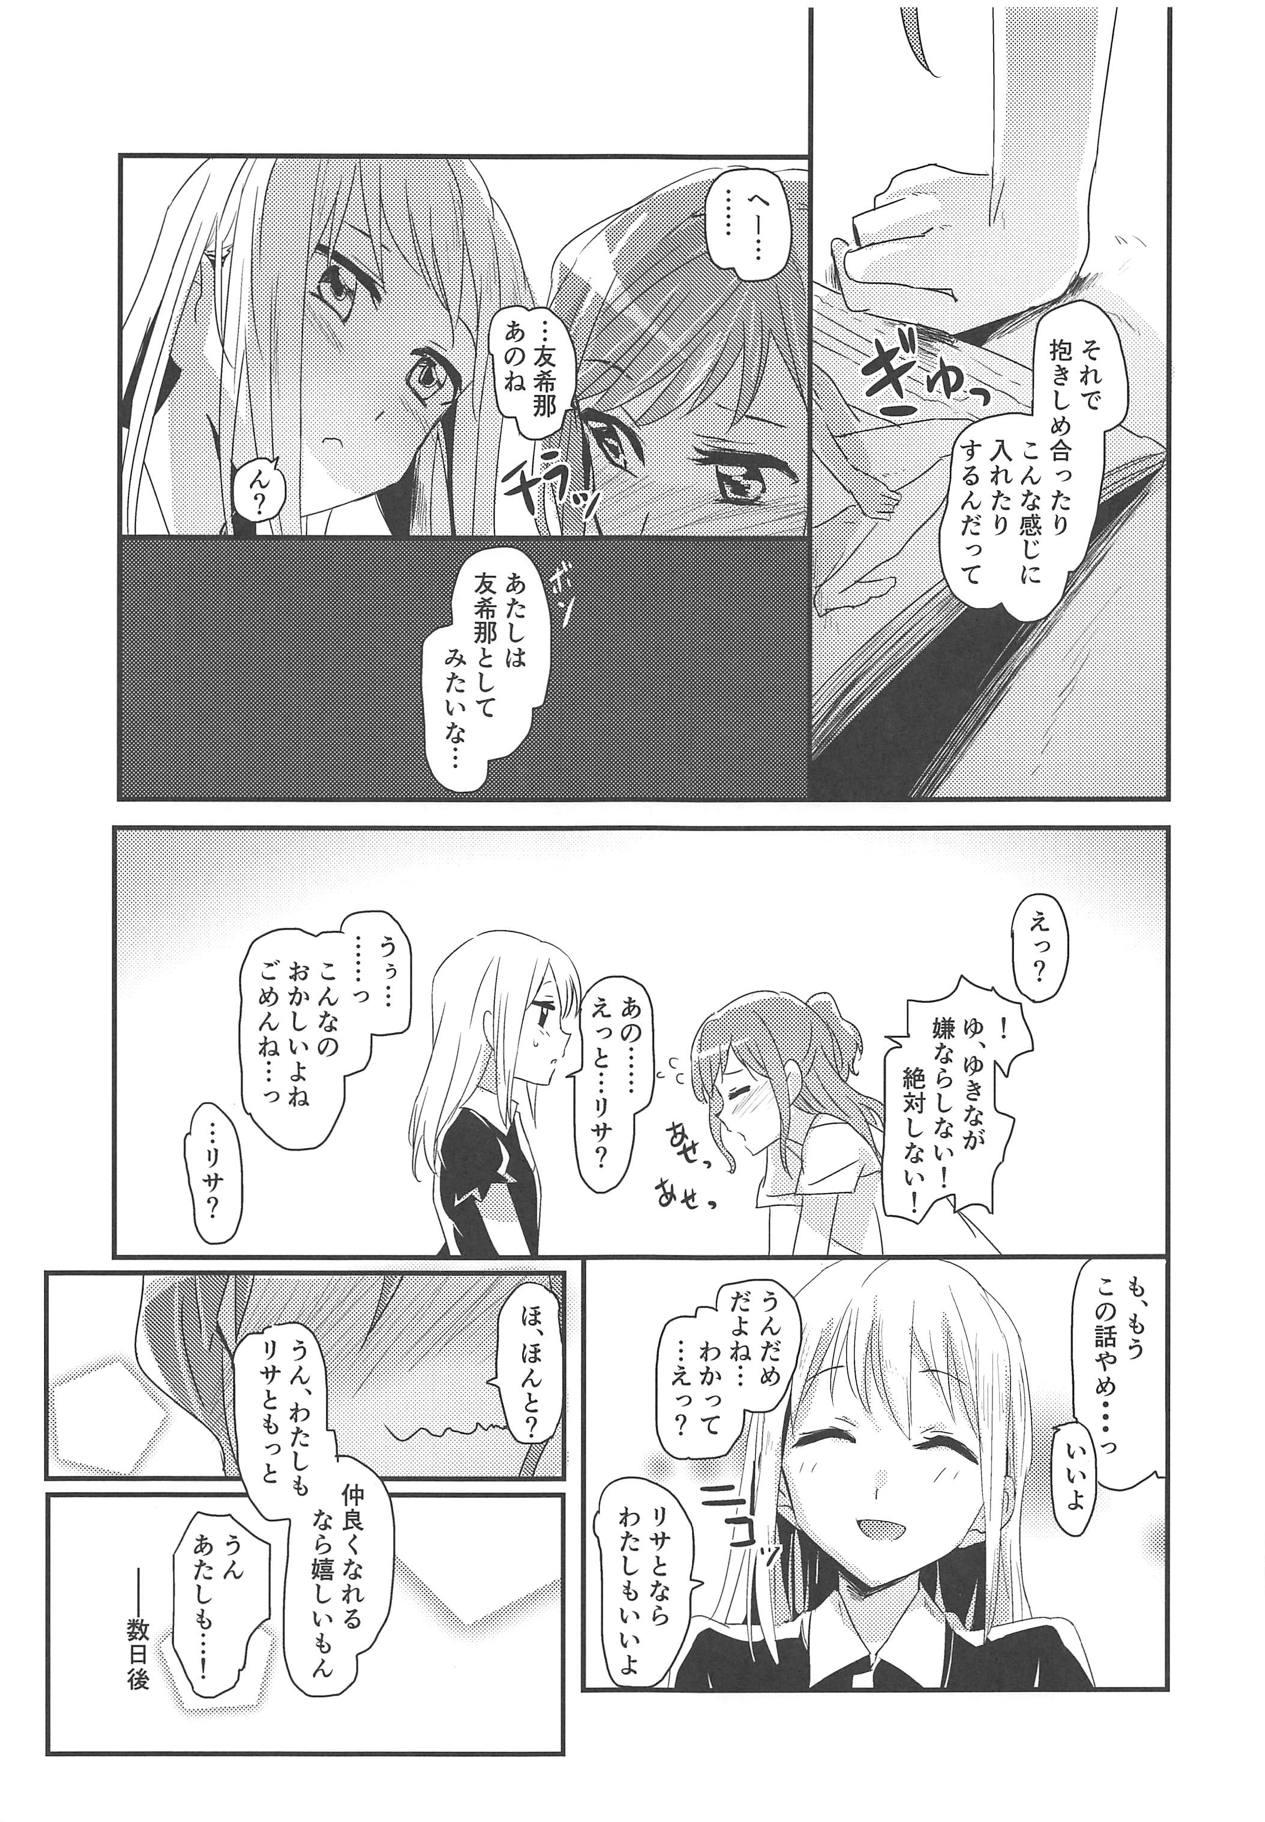 Old And Young Serenade - Bang dream Bubblebutt - Page 6